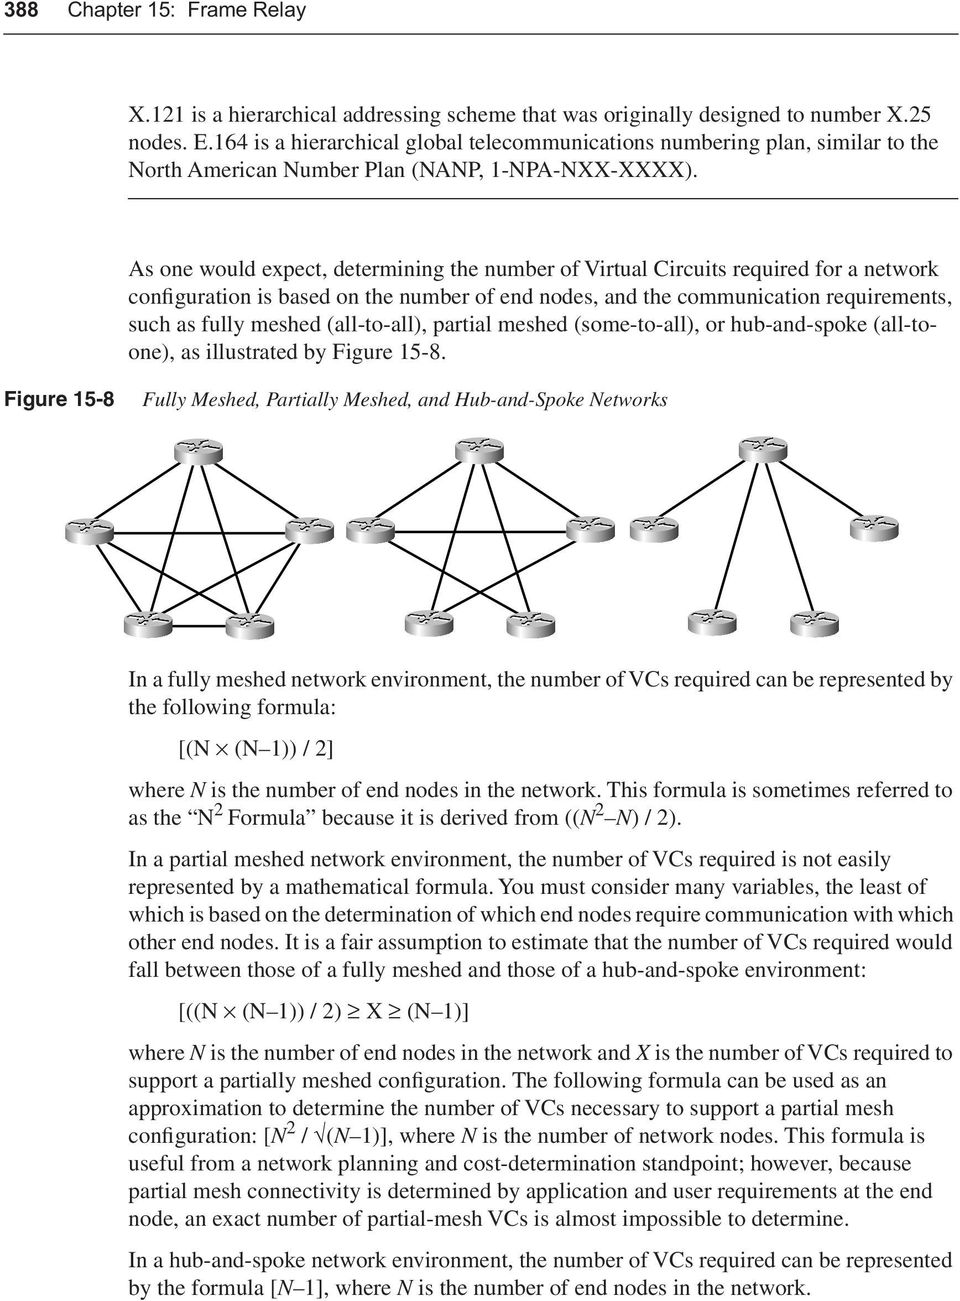 As one would expect, determining the number of Virtual Circuits required for a network configuration is based on the number of end nodes, and the communication requirements, such as fully meshed